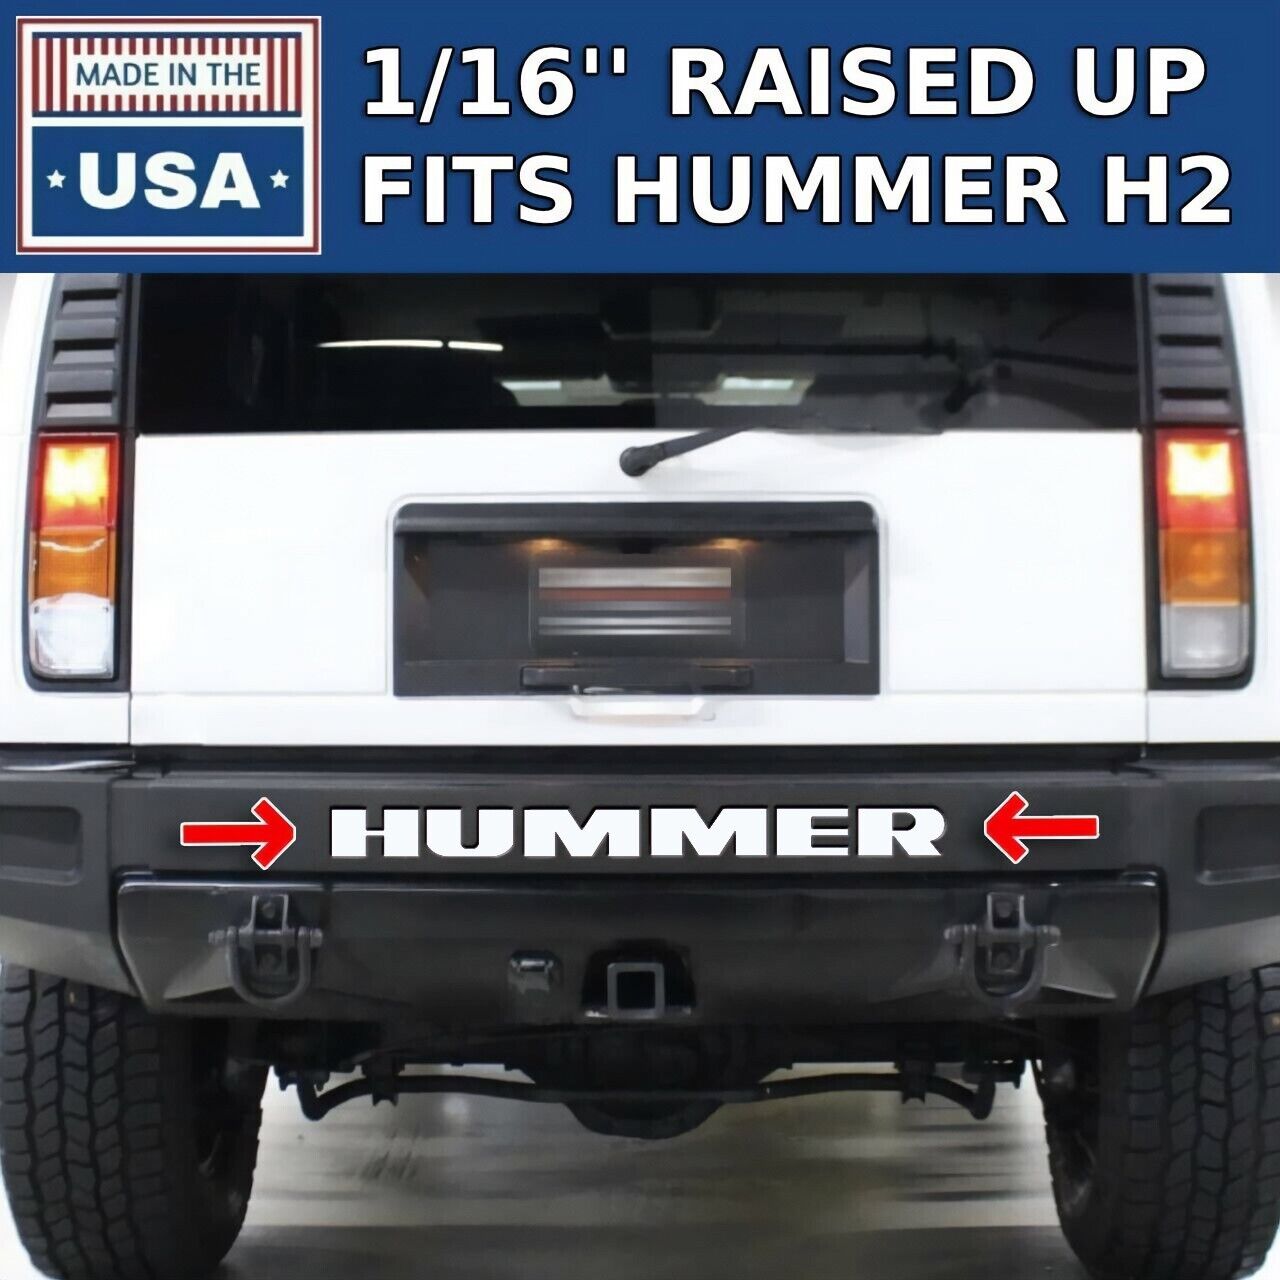 White Rear Bumper Letters for Hummer H2 ABS Plastic Inserts